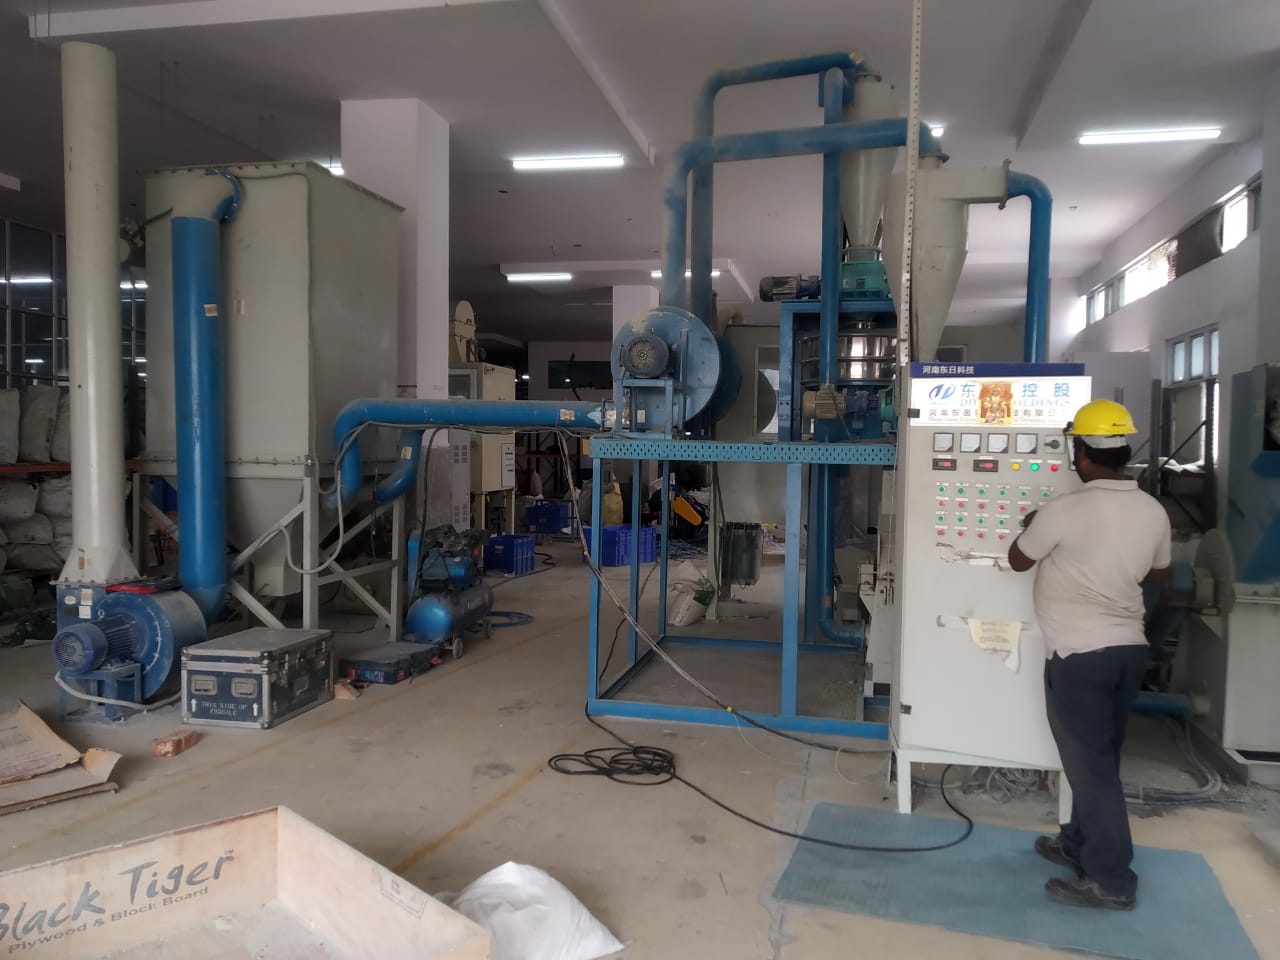 Deshwal Waste Management factory which helps recycle e-waste